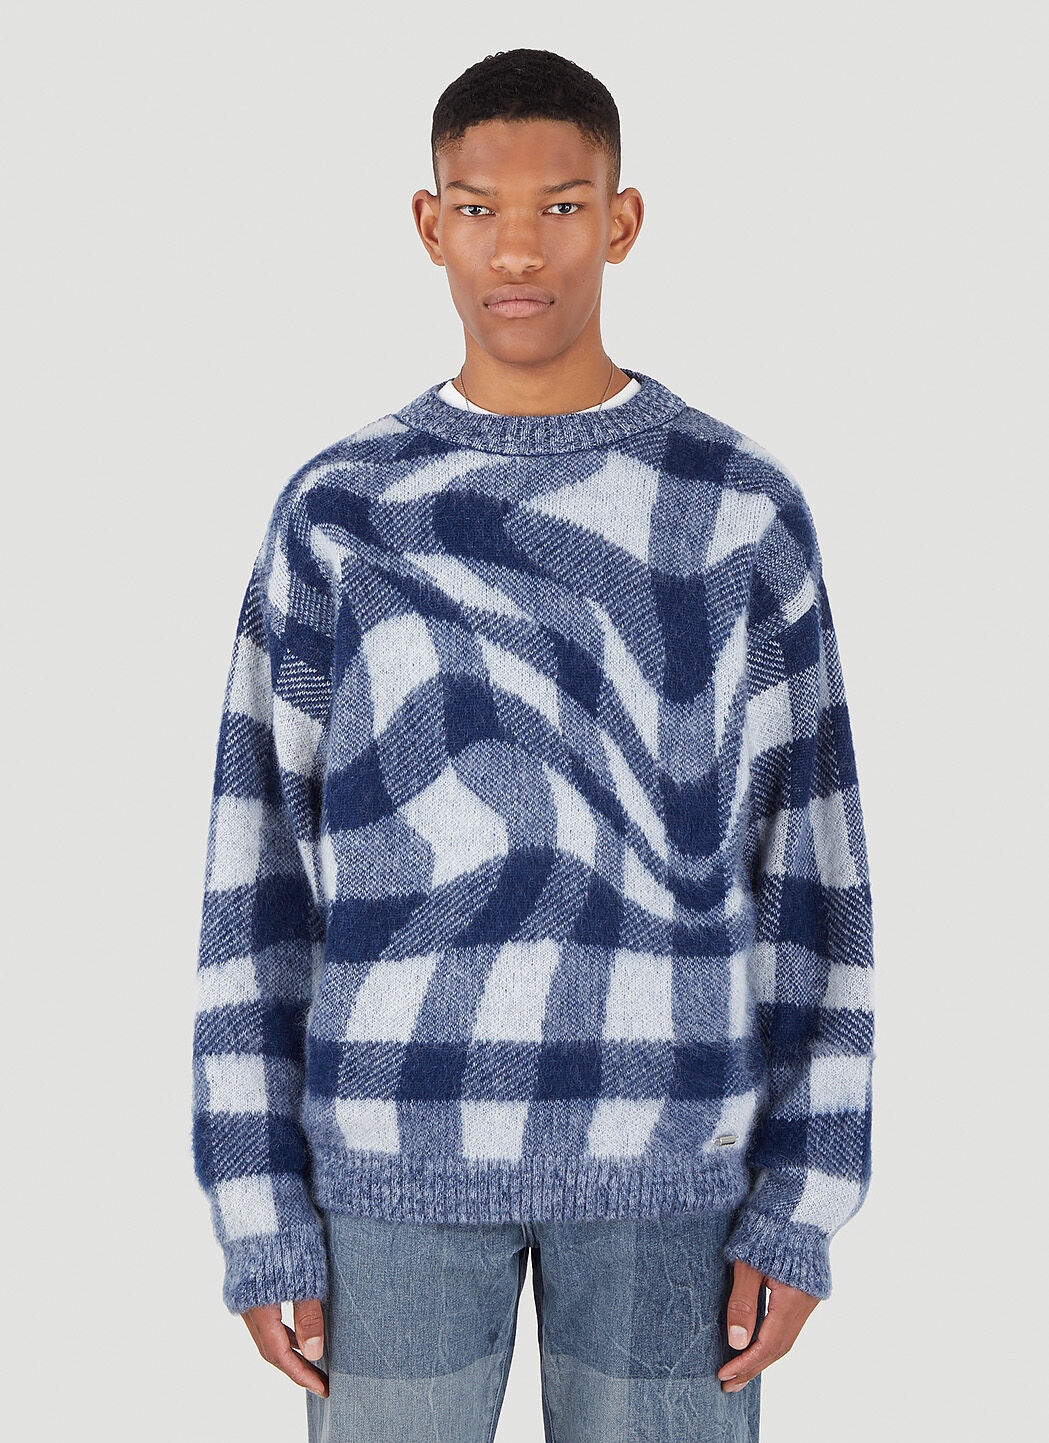 032c Distorted Check Sweater Black cee0156025